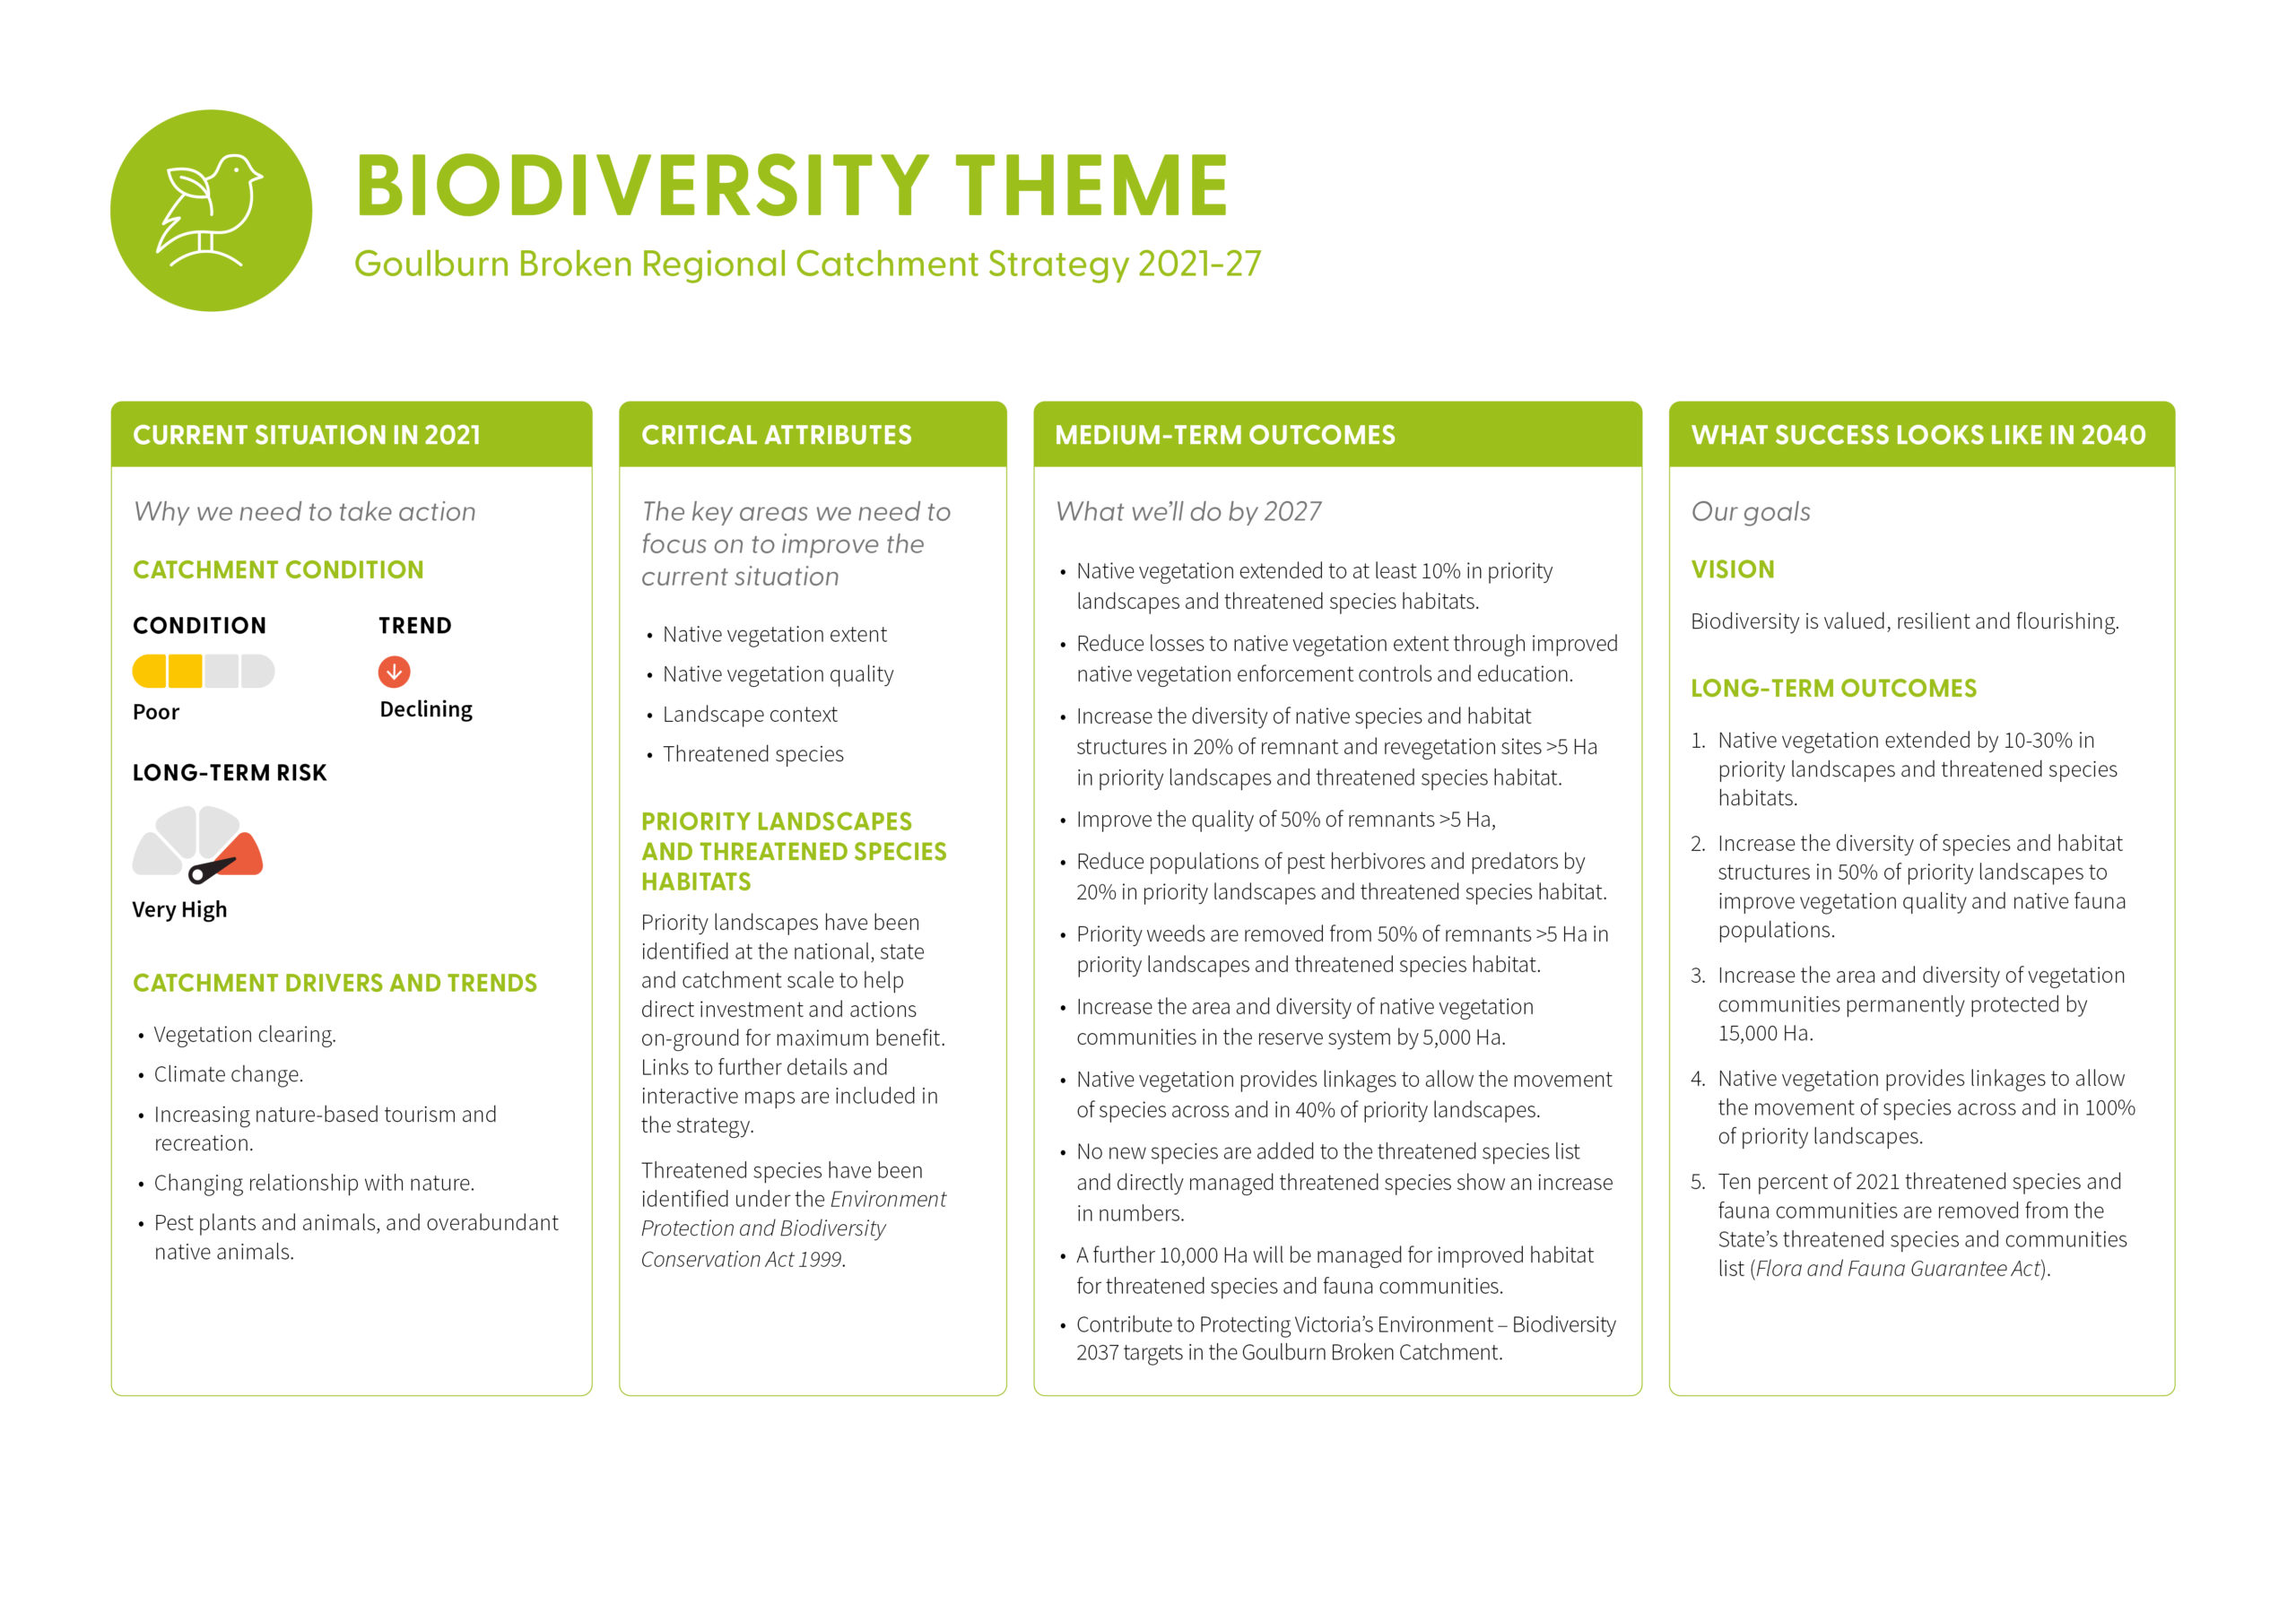 A diagram summarising the biodiversity theme content of the strategy, with four main sections: current situation in 2021, critical attributes, medium-term outcomes and what success looks like in 2040. The content of the diagram is described in the information below the diagram.